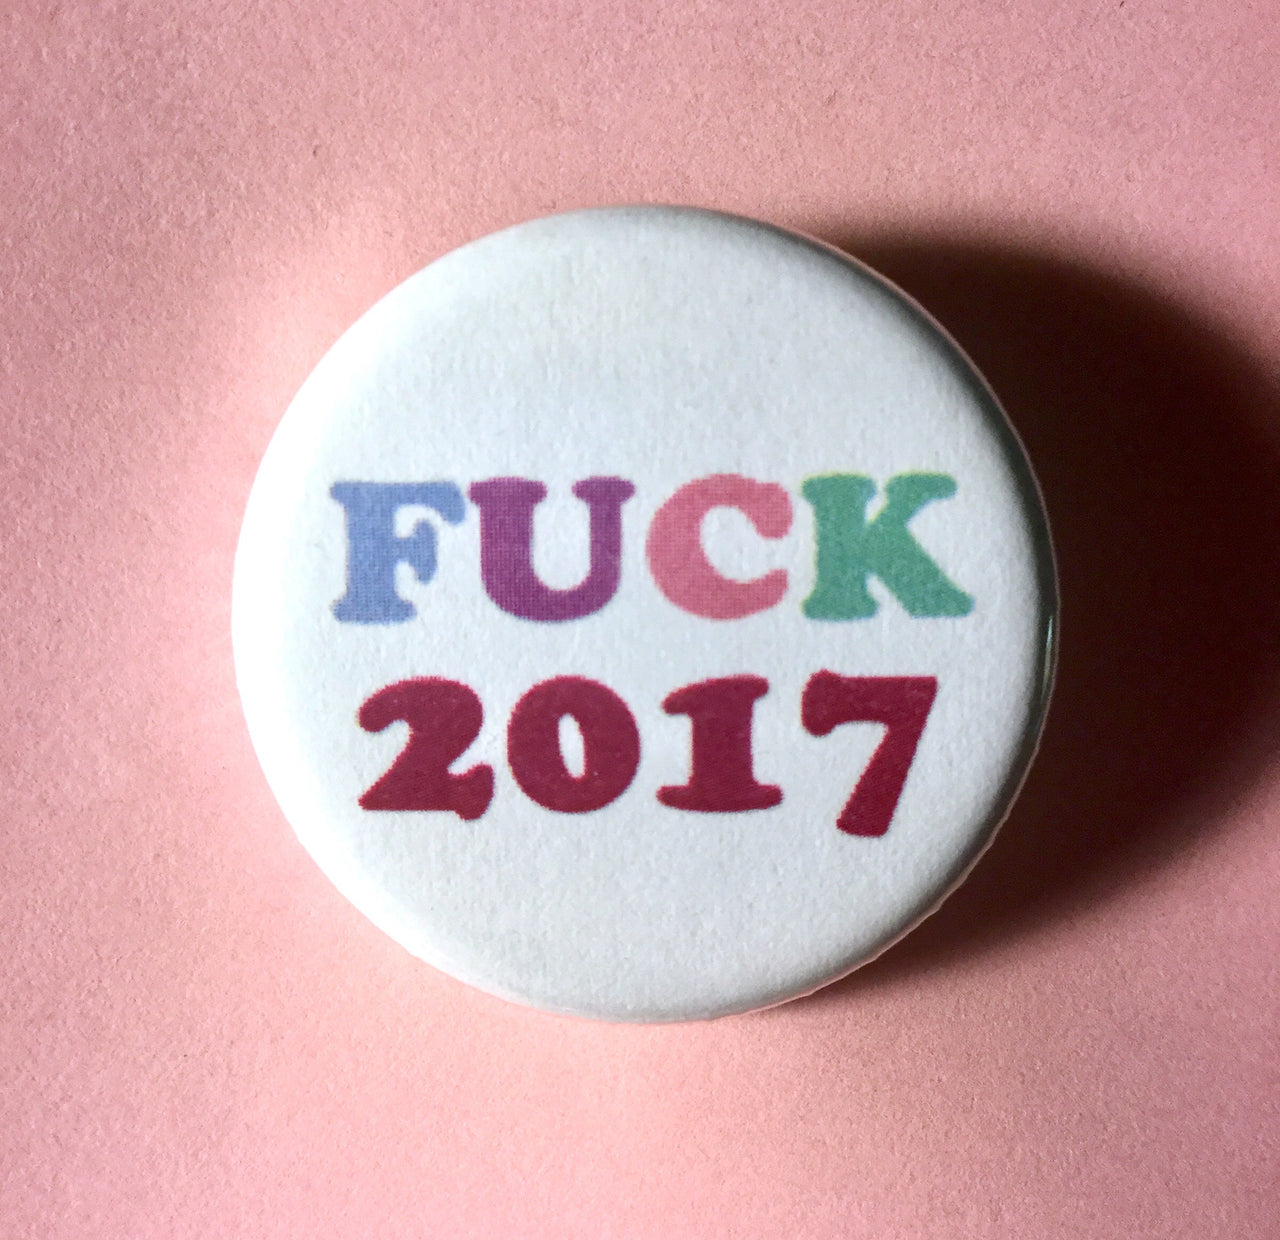 Fuck 2017 - Radical Buttons